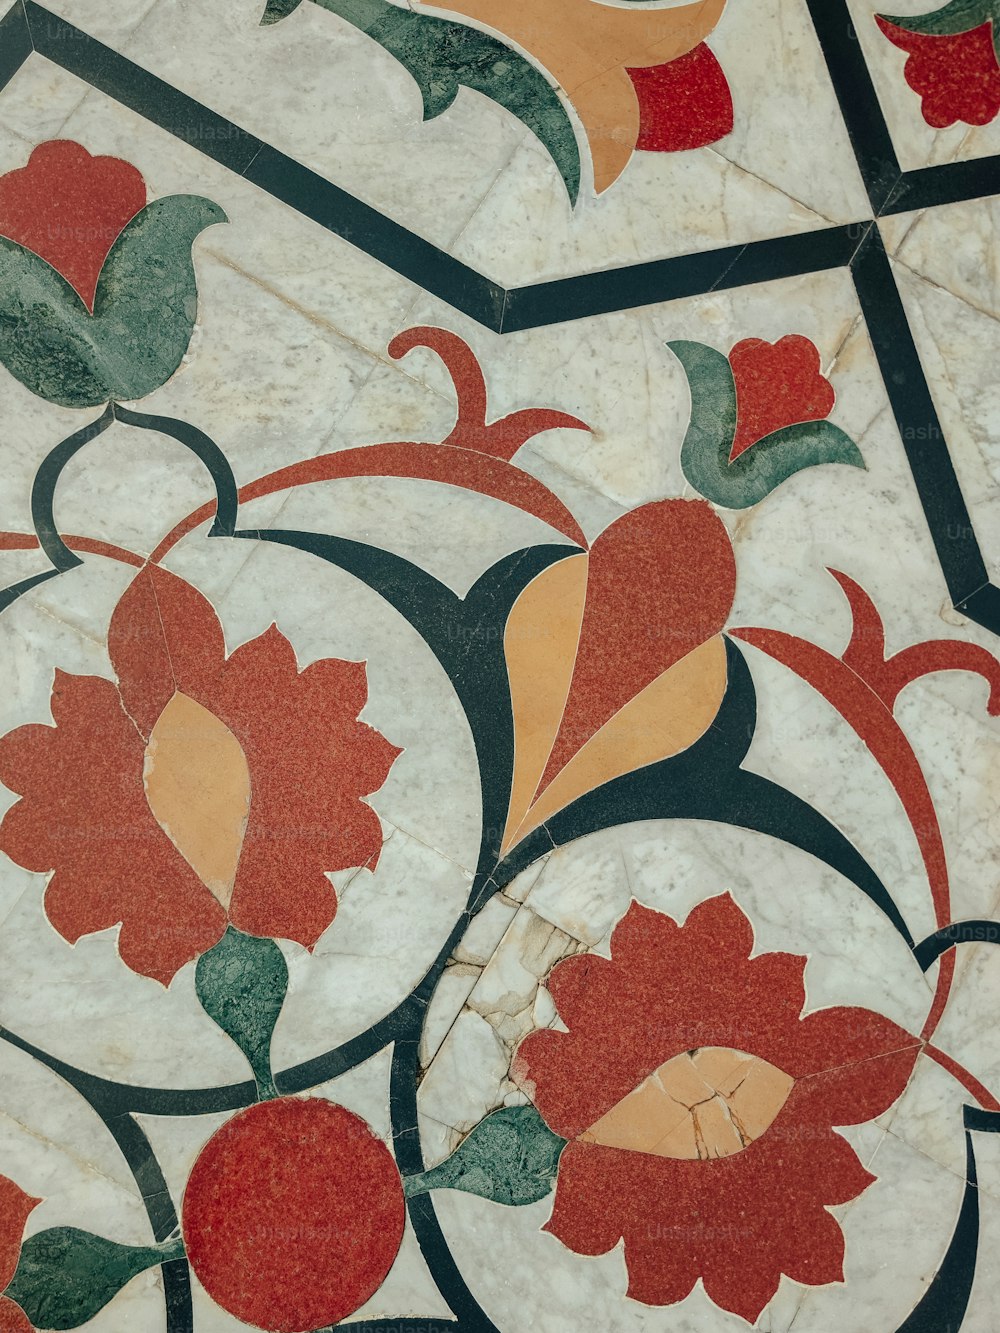 a close up of a tile with flowers on it